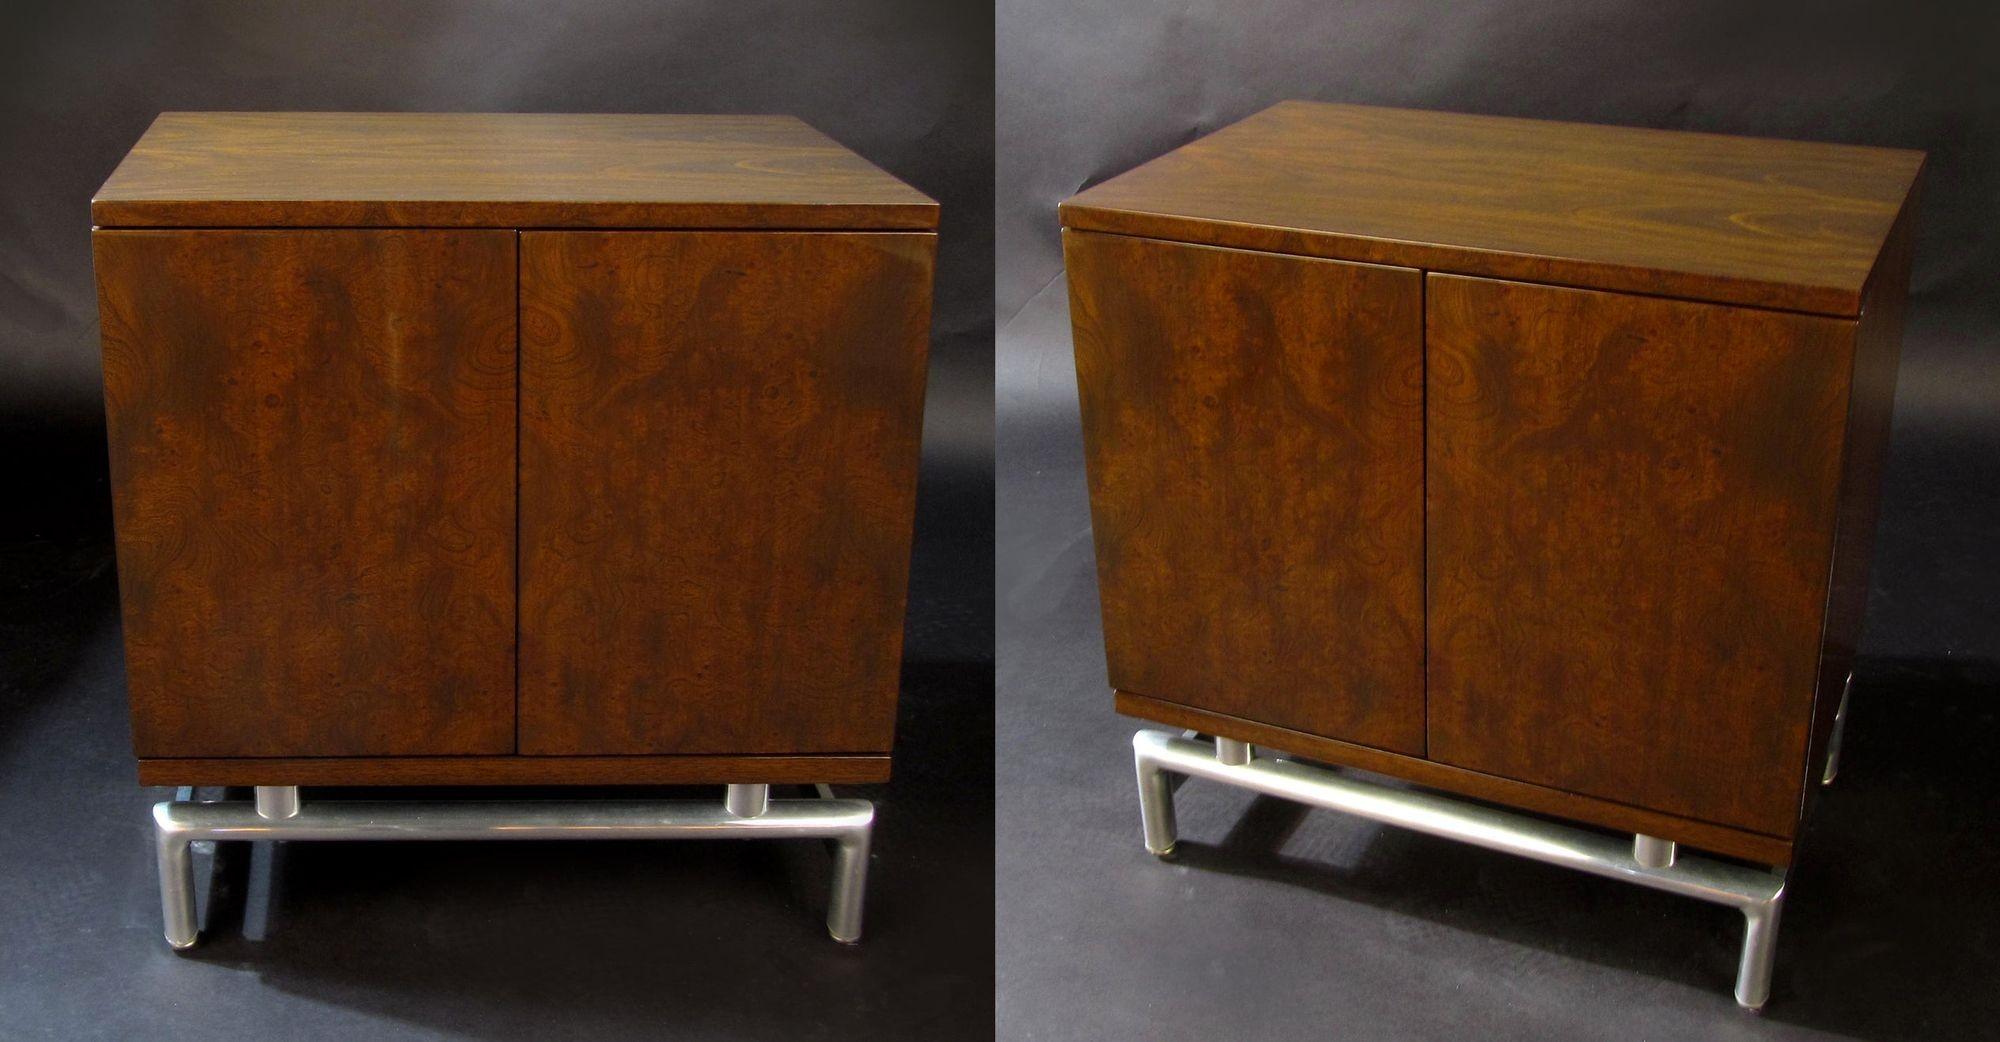 A handsome pair of fine burled wood nightstands. The cabinets sit atop chromed steel bases, giving them an illusion of floating.
Behind two front doors, each nightstand opens up to a single drawer and a large open storage area. At 25